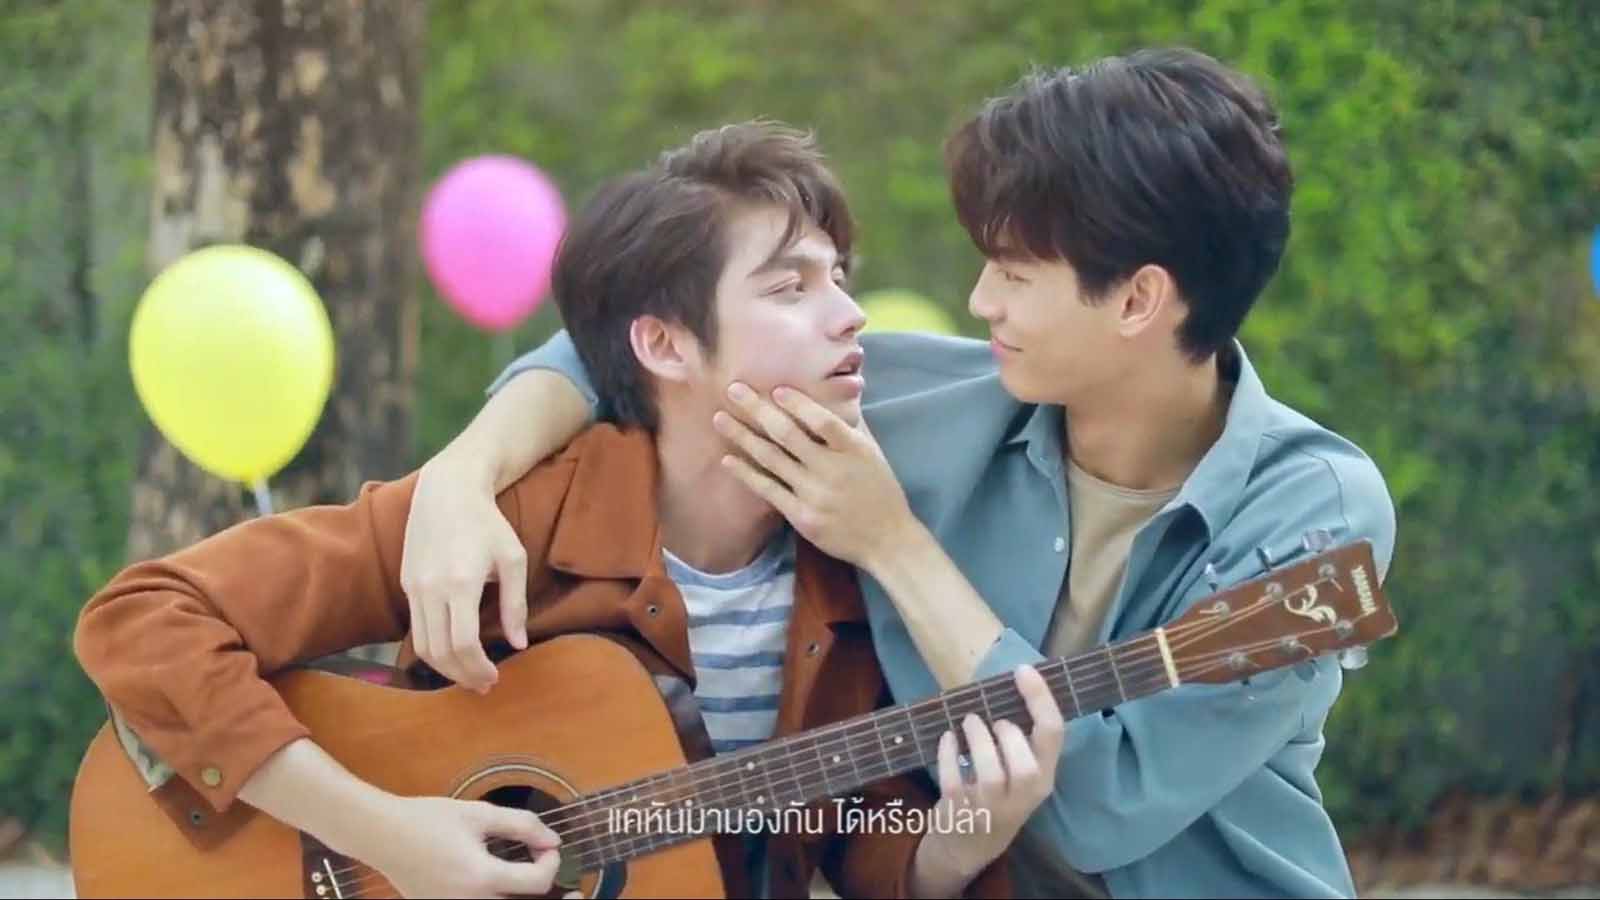 A beginners guide to the Thai boy love show '2gether: The Series'